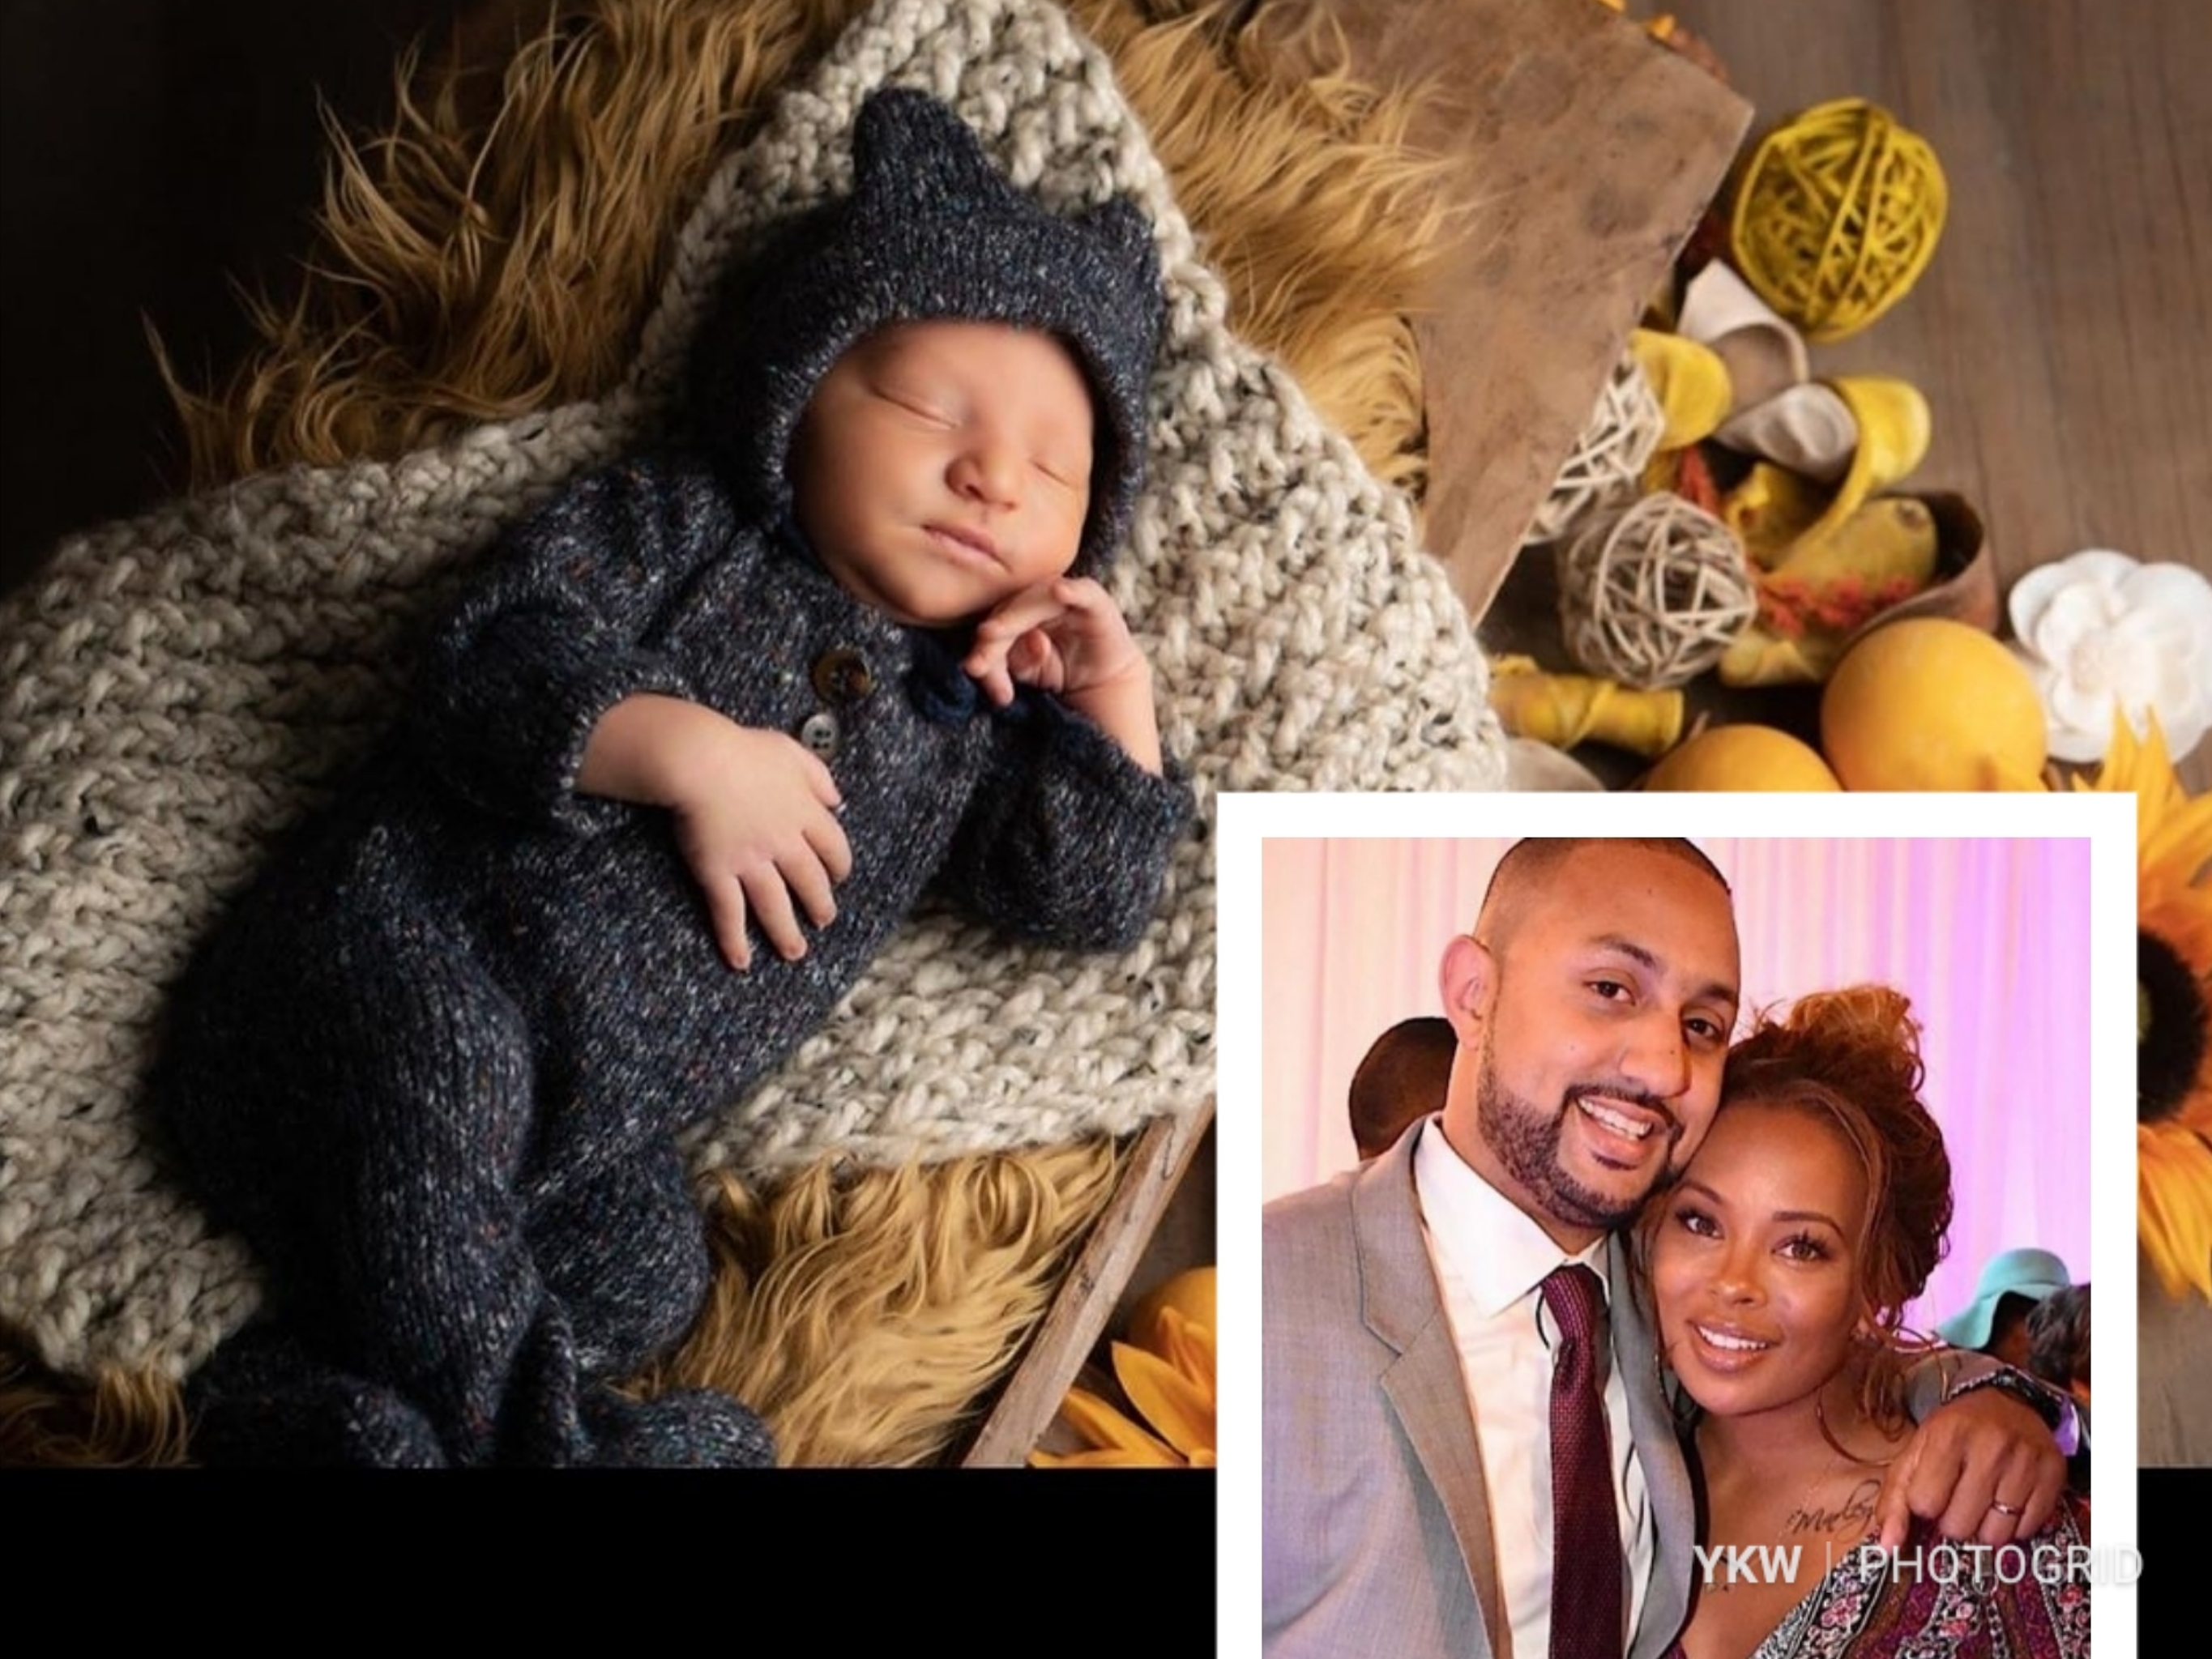 Real Housewives of Atlanta Star Eva Marcille Shares First Photo Of Baby Maverick